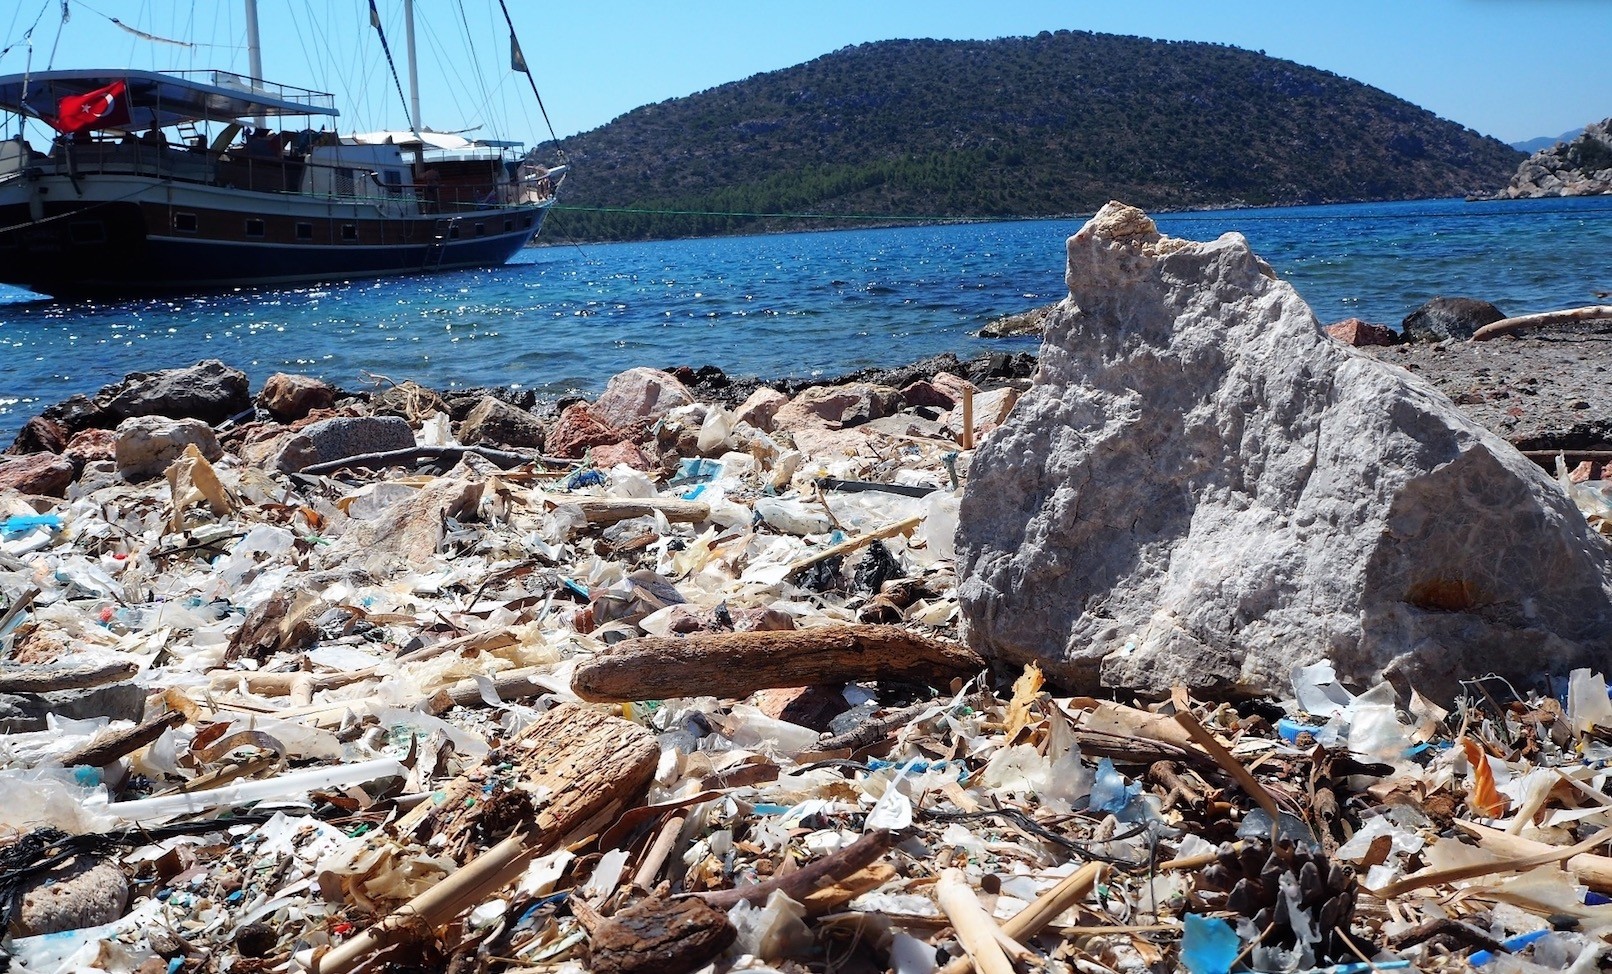 The coasts of Turkey, especially after the summer holidays, are filled with leftover trash.